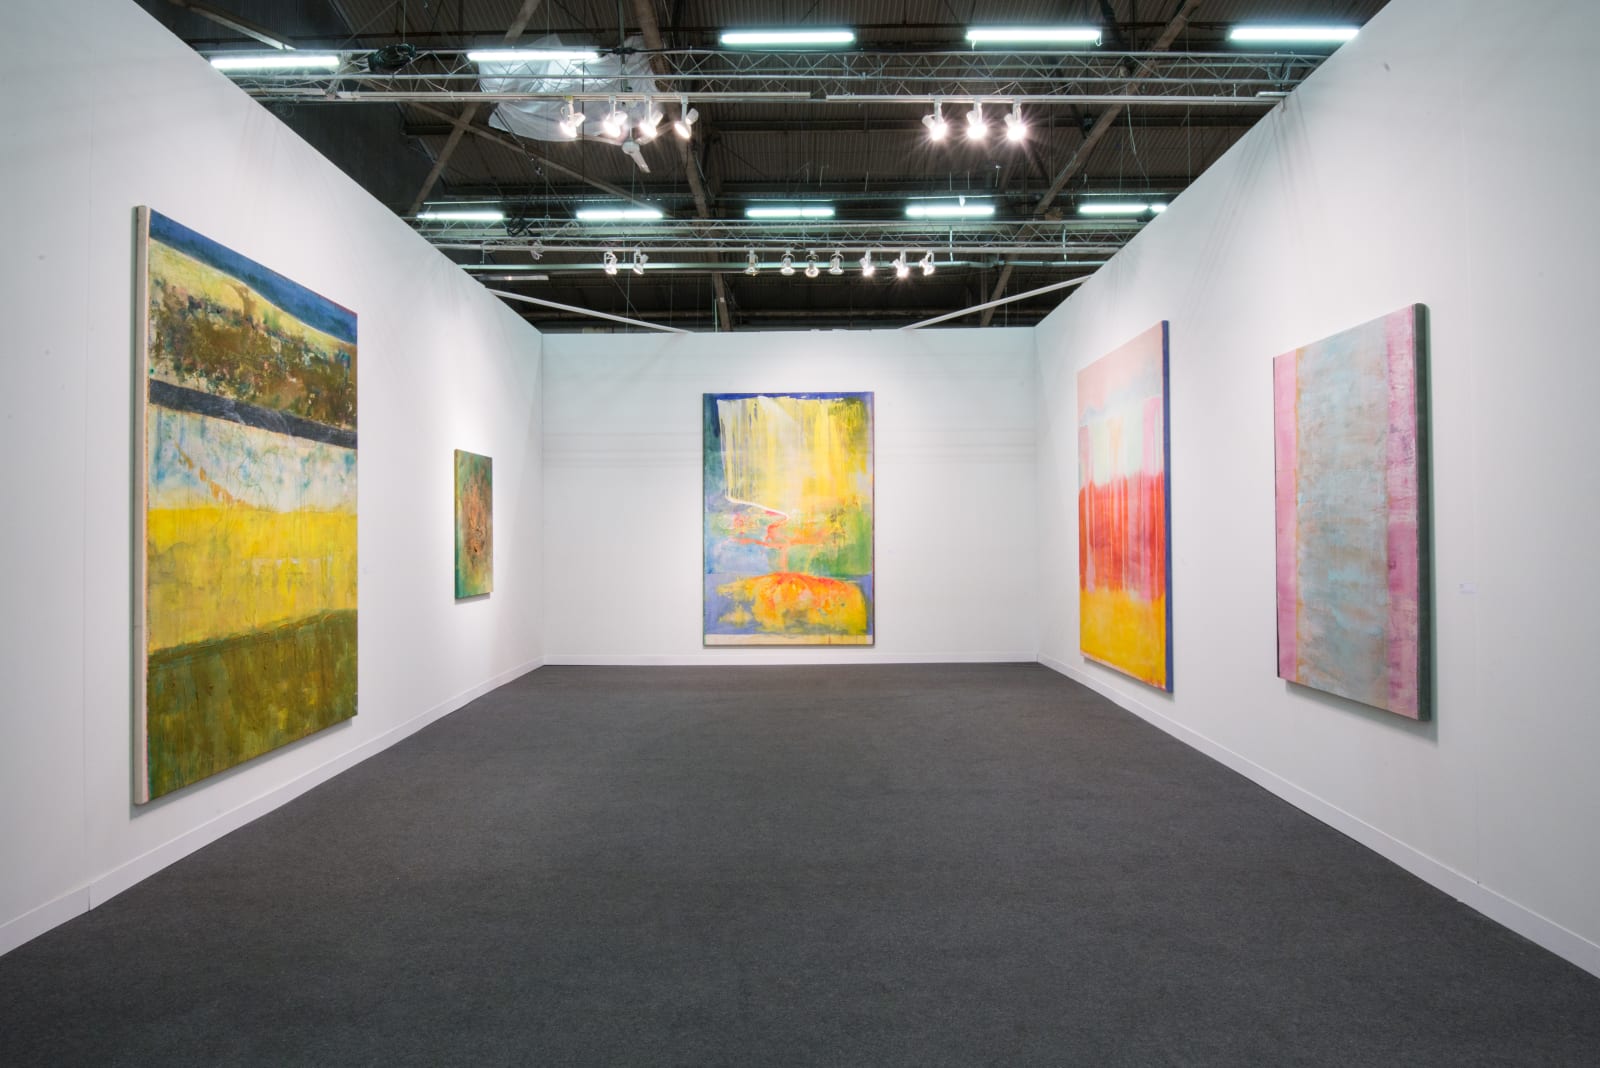 Frank Bowling, Installation view, Hales Gallery at The Armory Show, 2016 